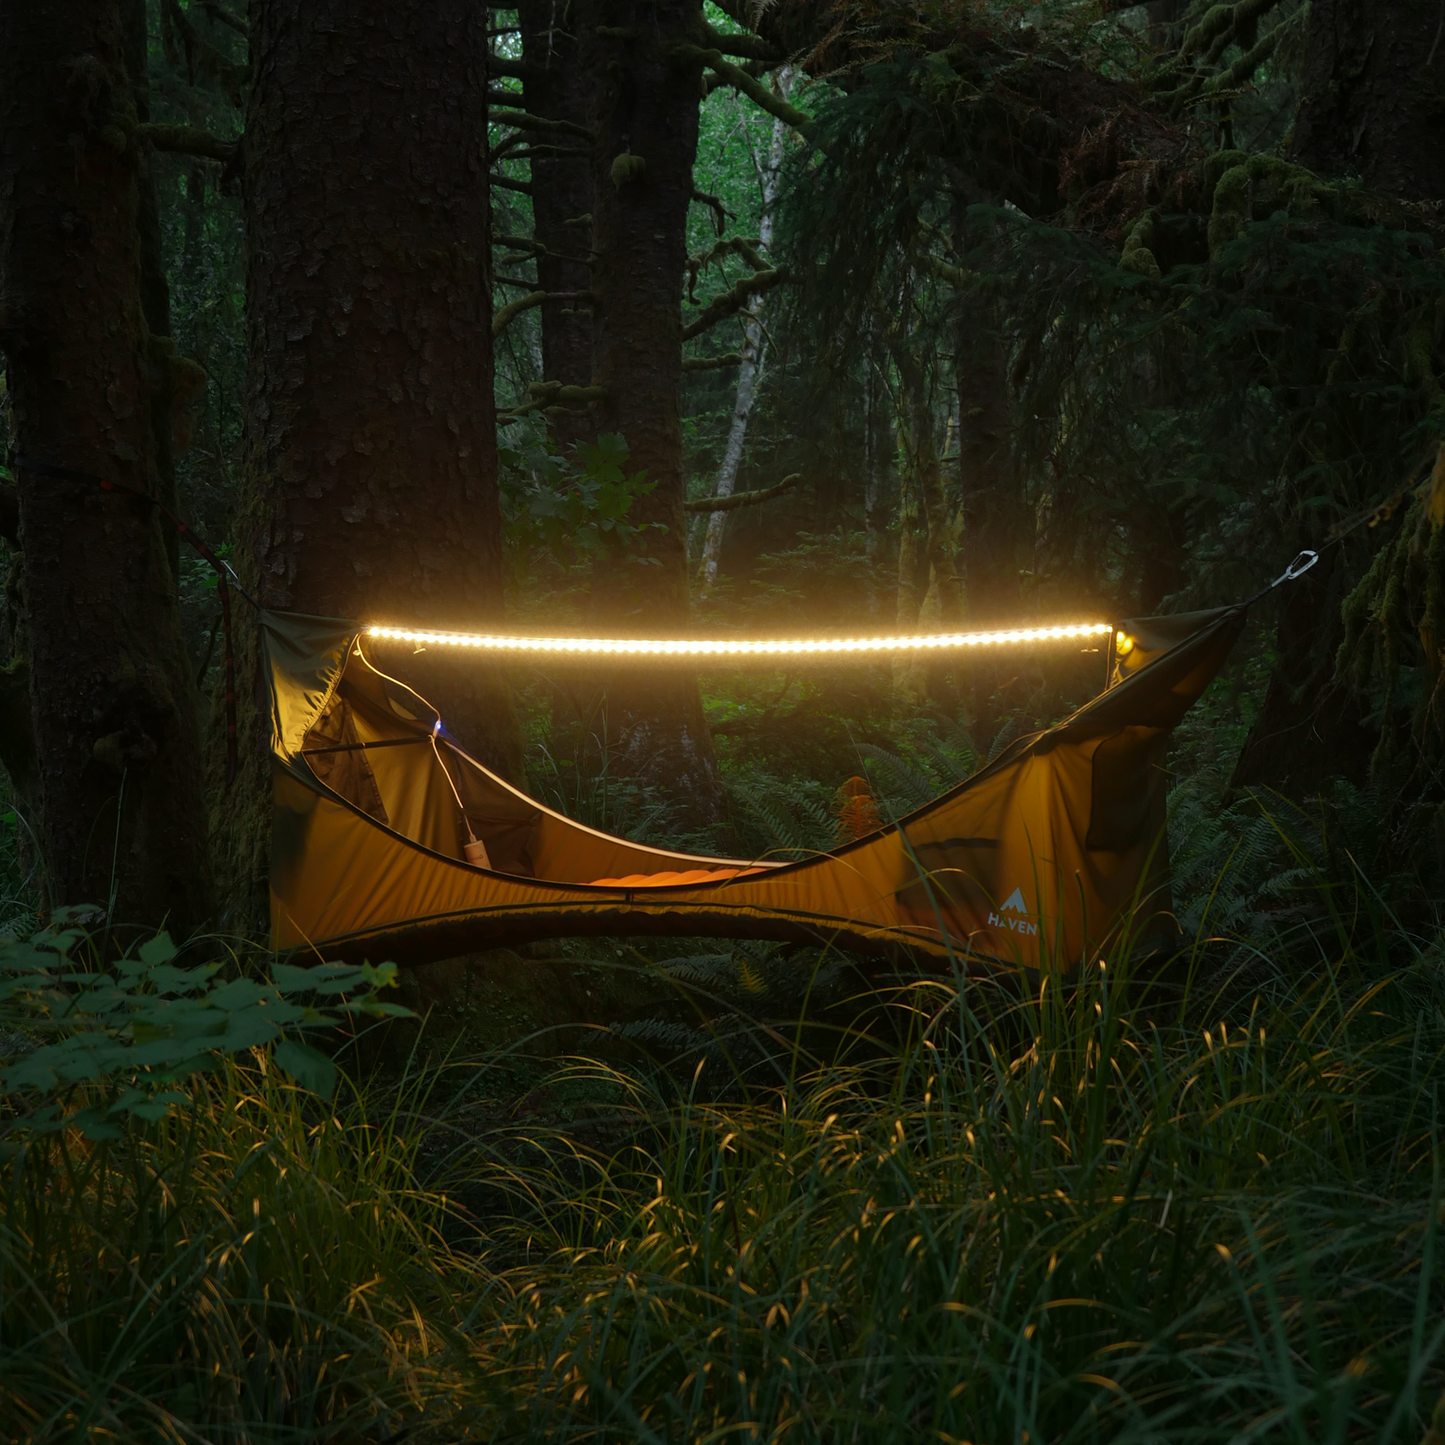 Camping hammock hanging between two trees with LED lights glowing